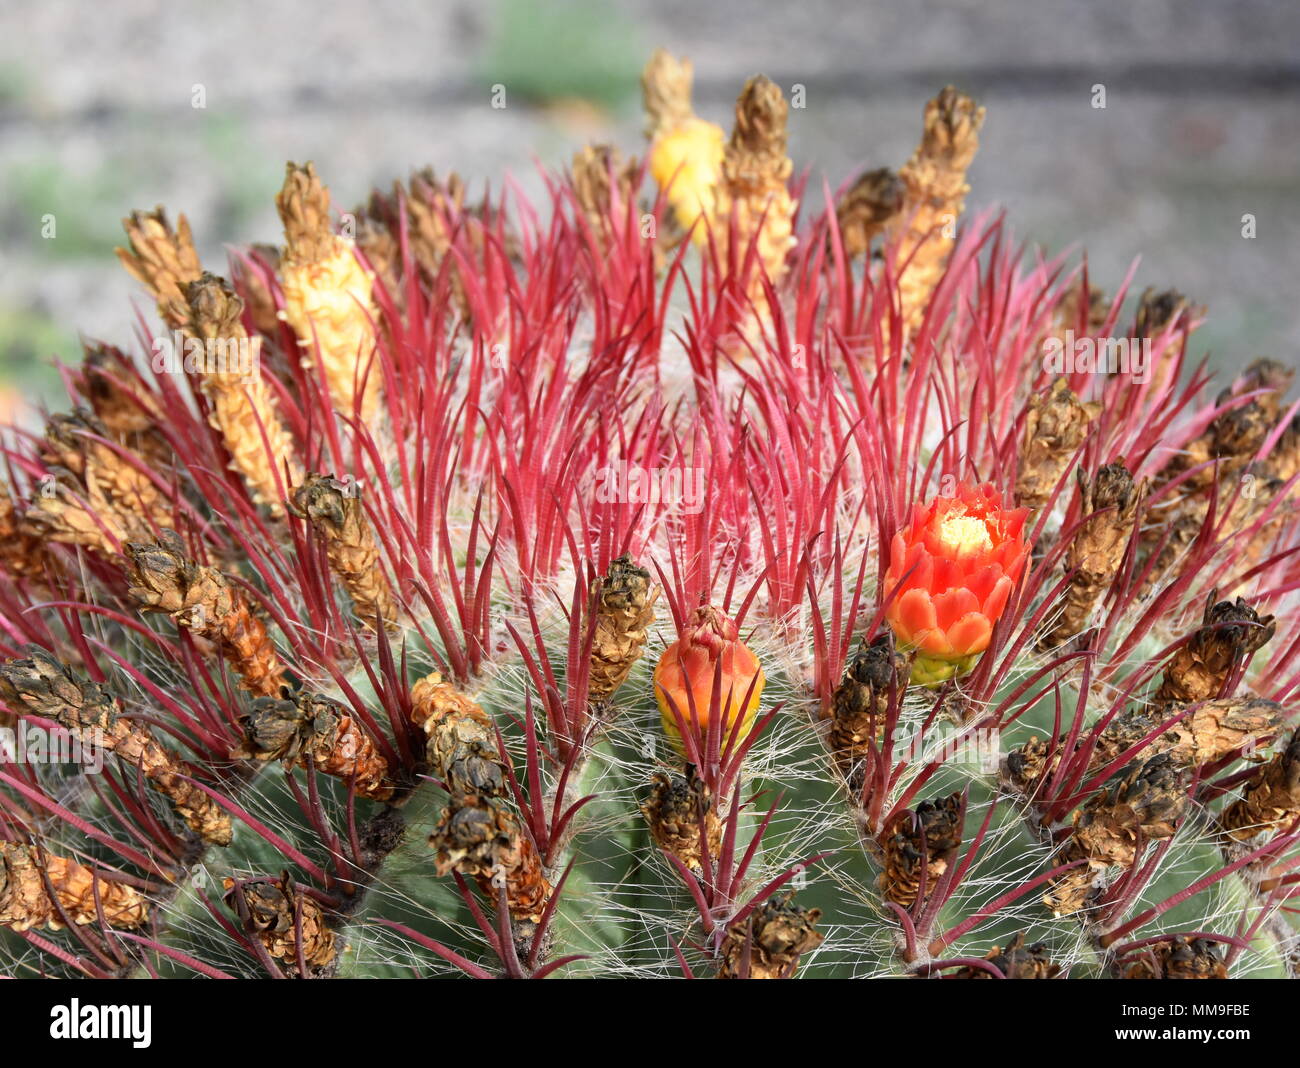 Closeup on the thorns of a fire barrel cactus Stock Photo